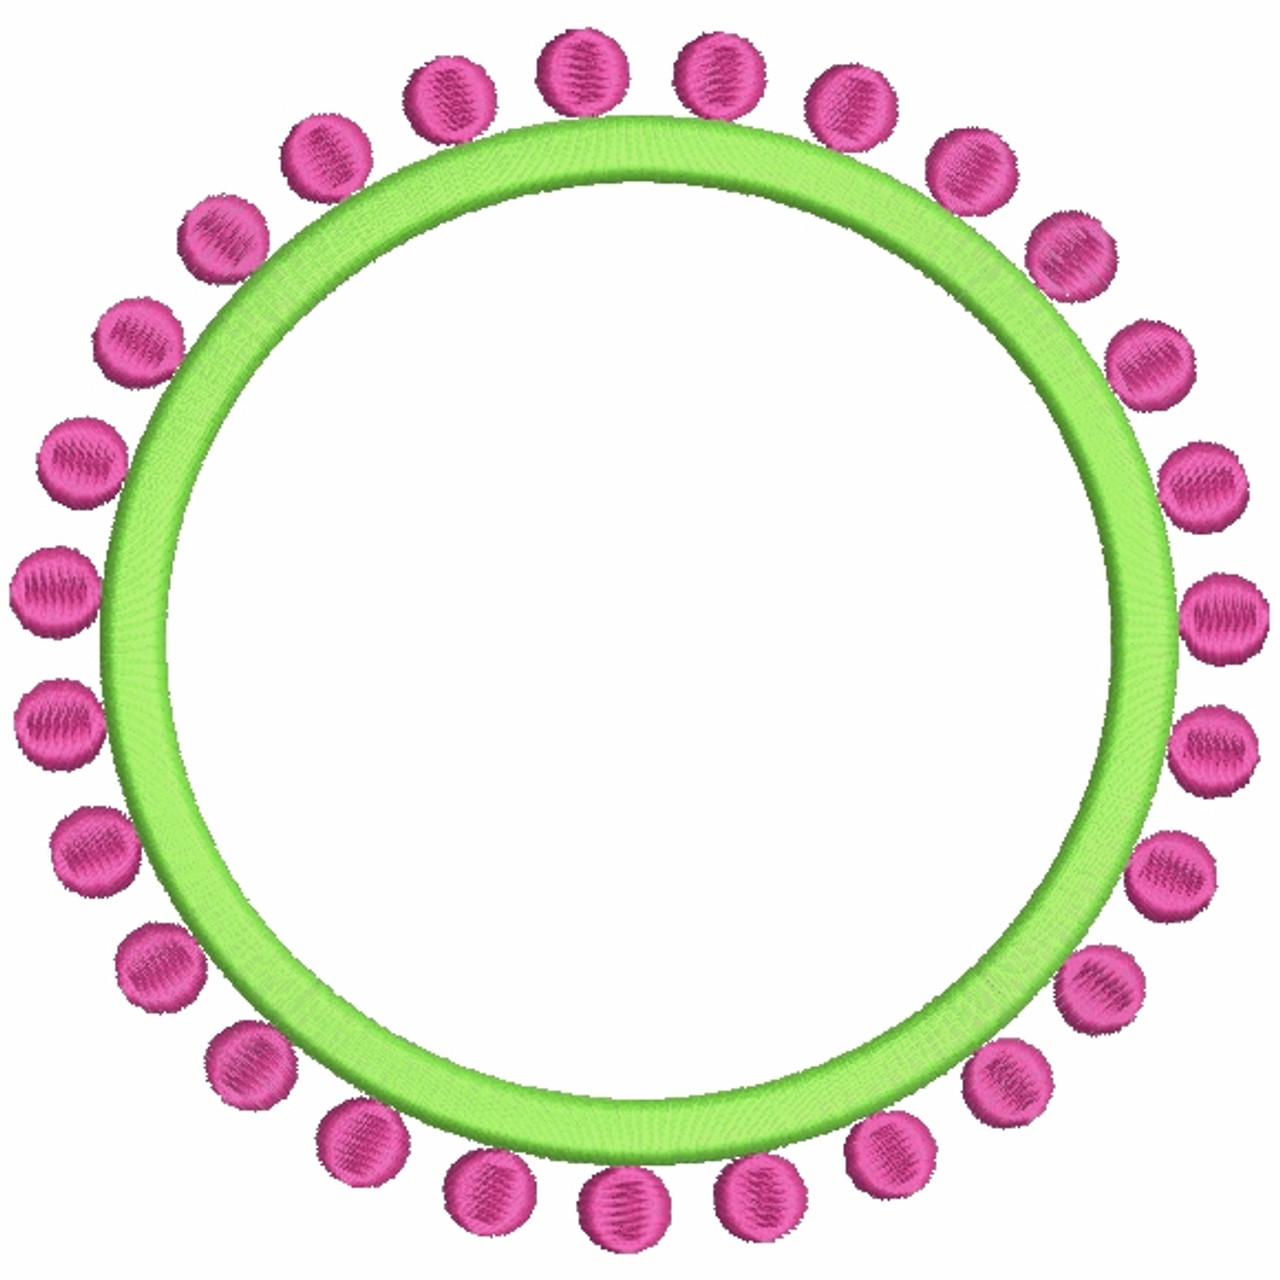 394 Preppy Circle Dots Monogram Or Font Frames Embroidery Designs